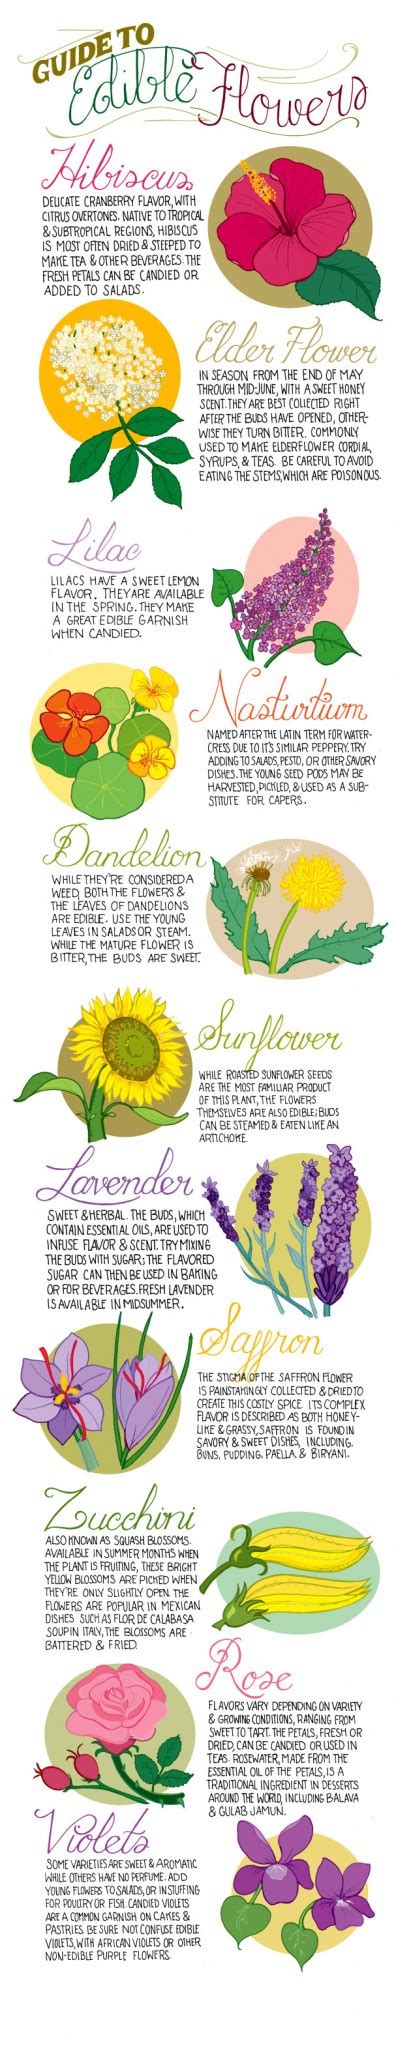 A Guide To Edible Flowers